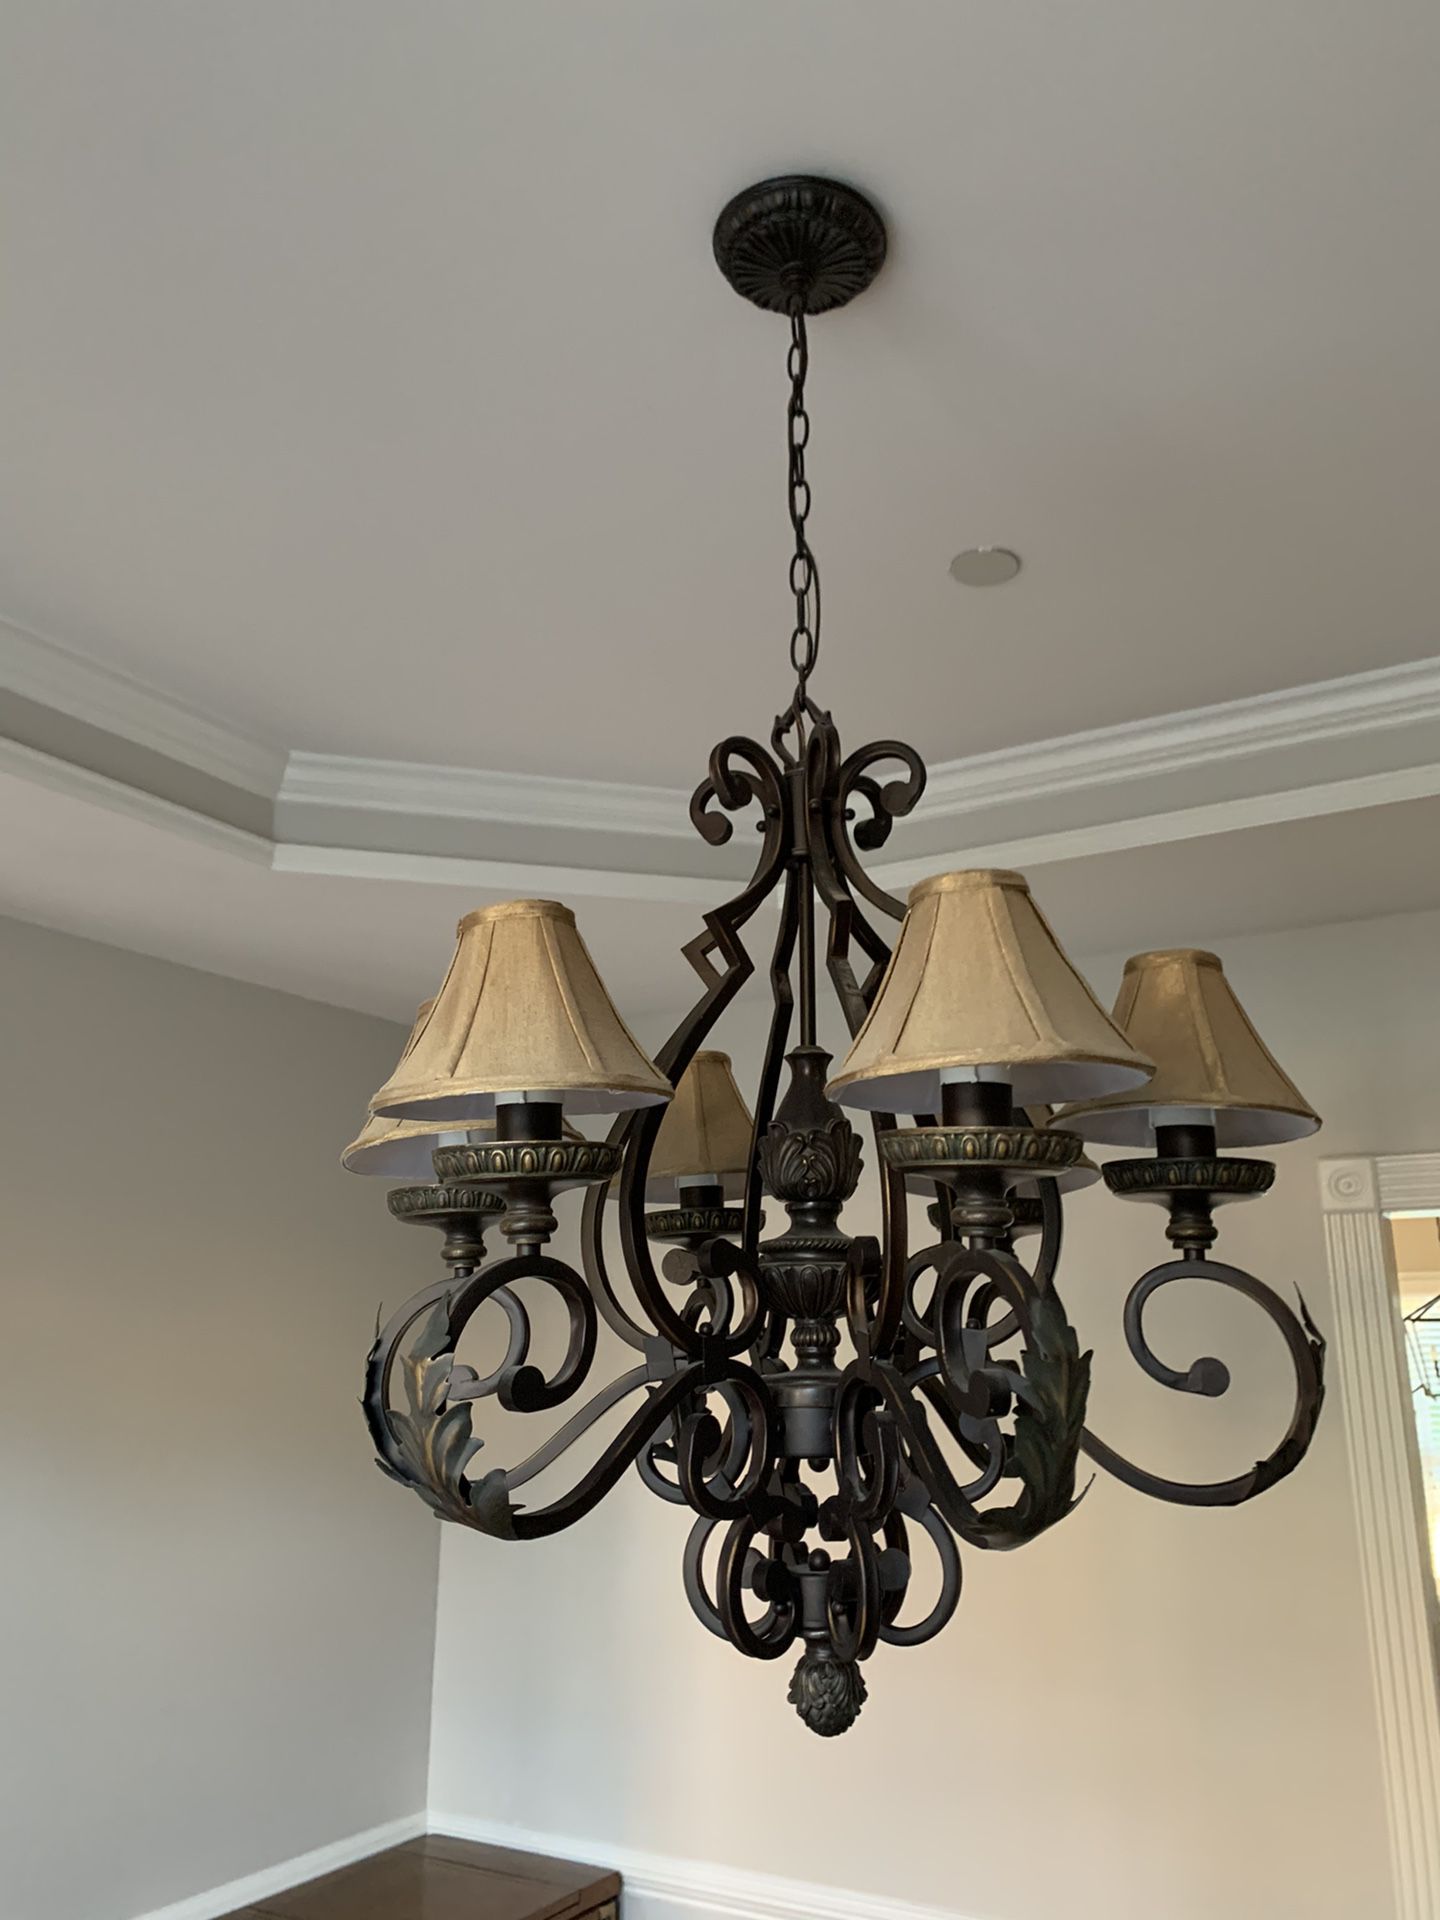 Lighting Fixture For Formal Dining Room (Oil Rubbed bronze)